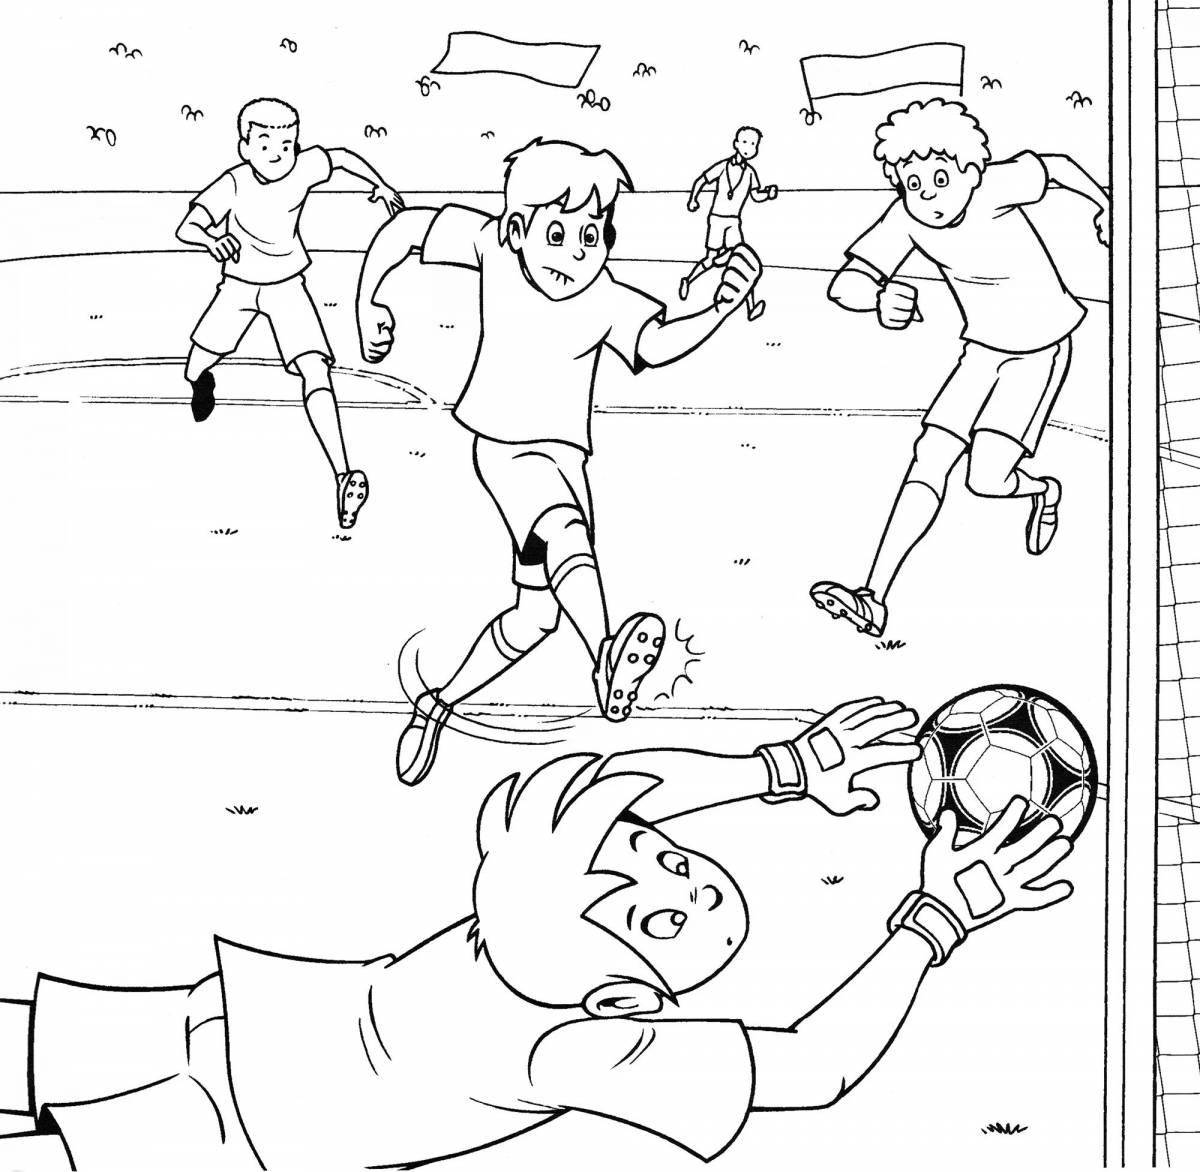 Charming coach coloring page